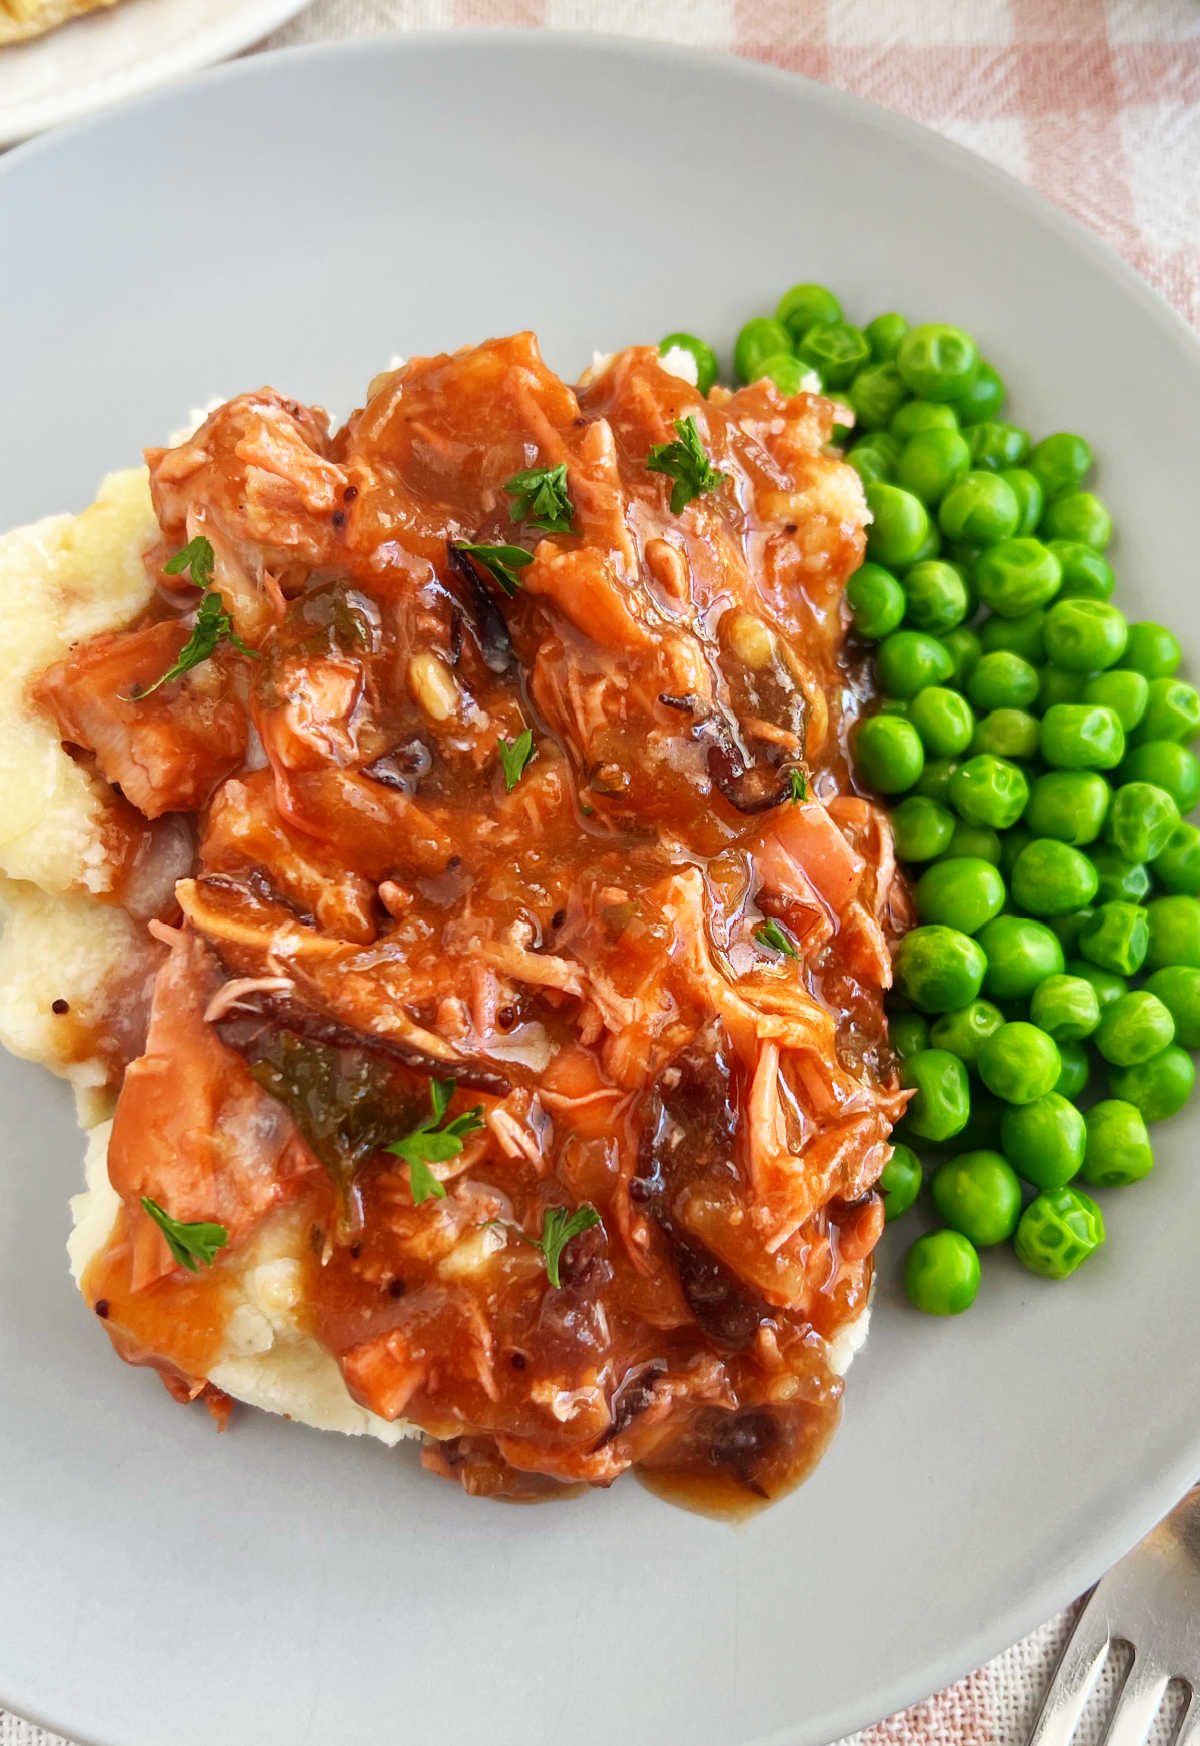 shredded cranberry chicken with mashed potatoes and peas on plate.